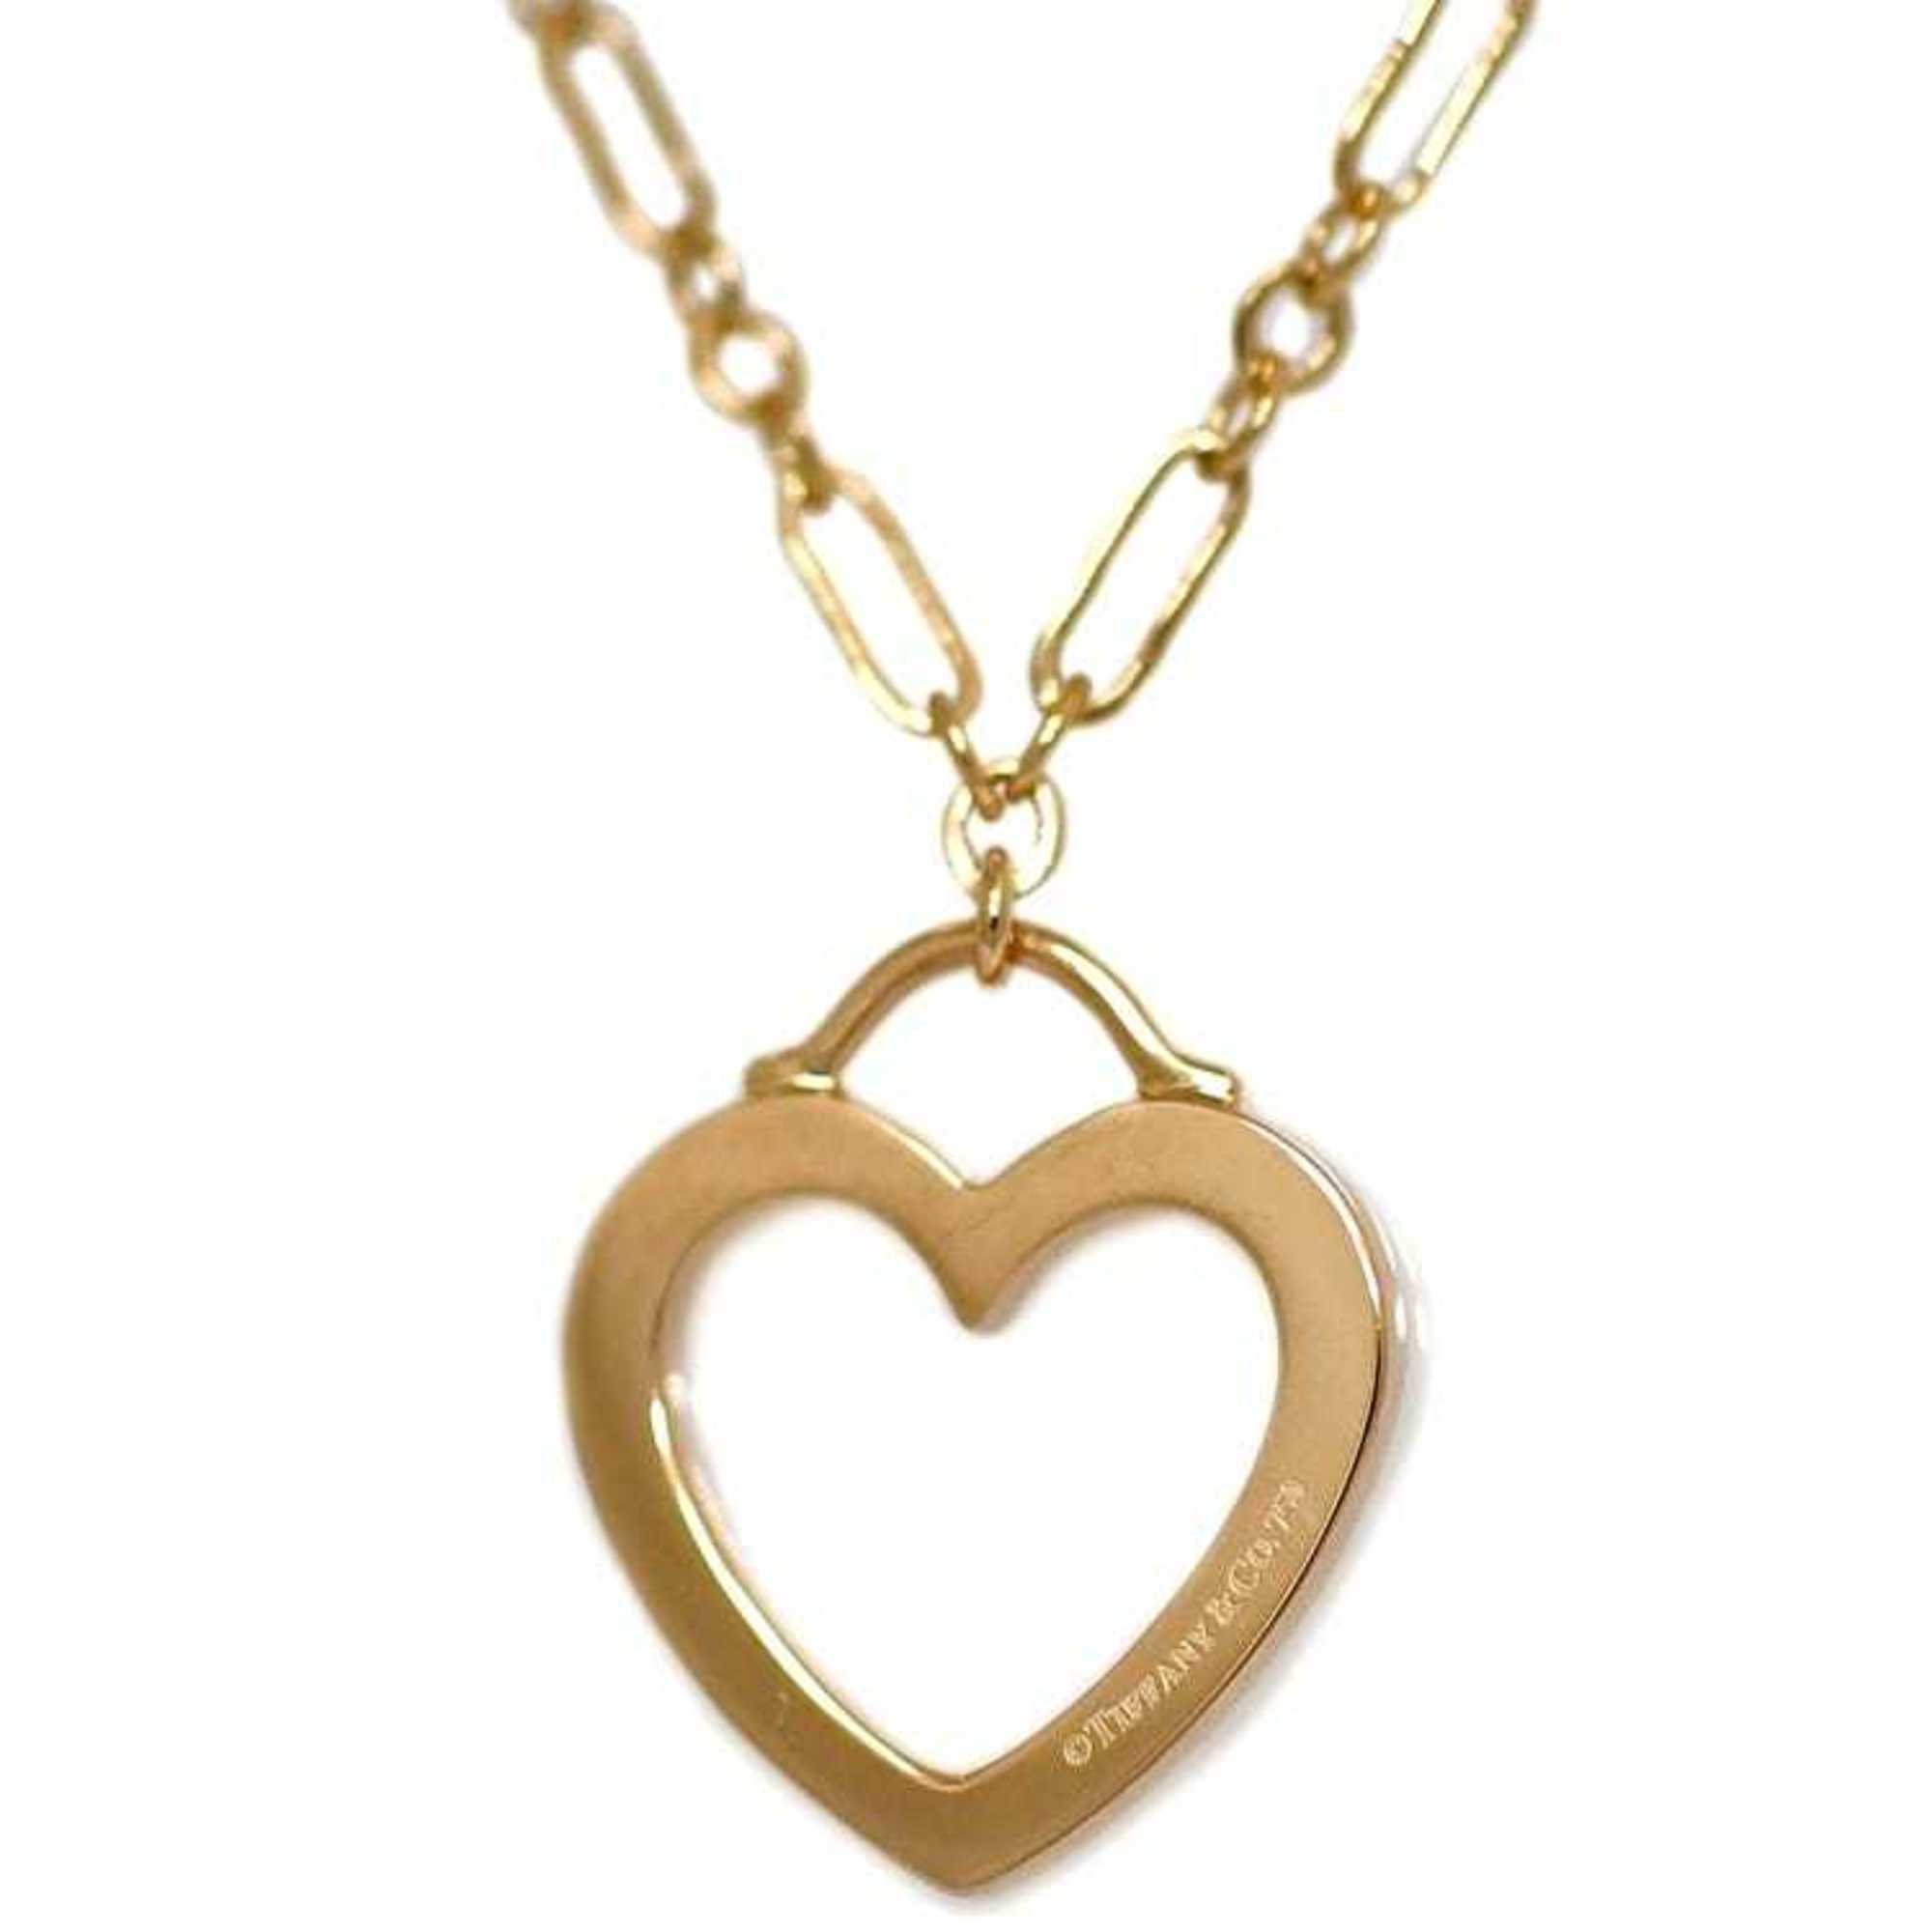 Tiffany Sentimental Heart Necklace Pink Gold f-19999 K18 750 TIFFANY&Co. PG Chain Ladies